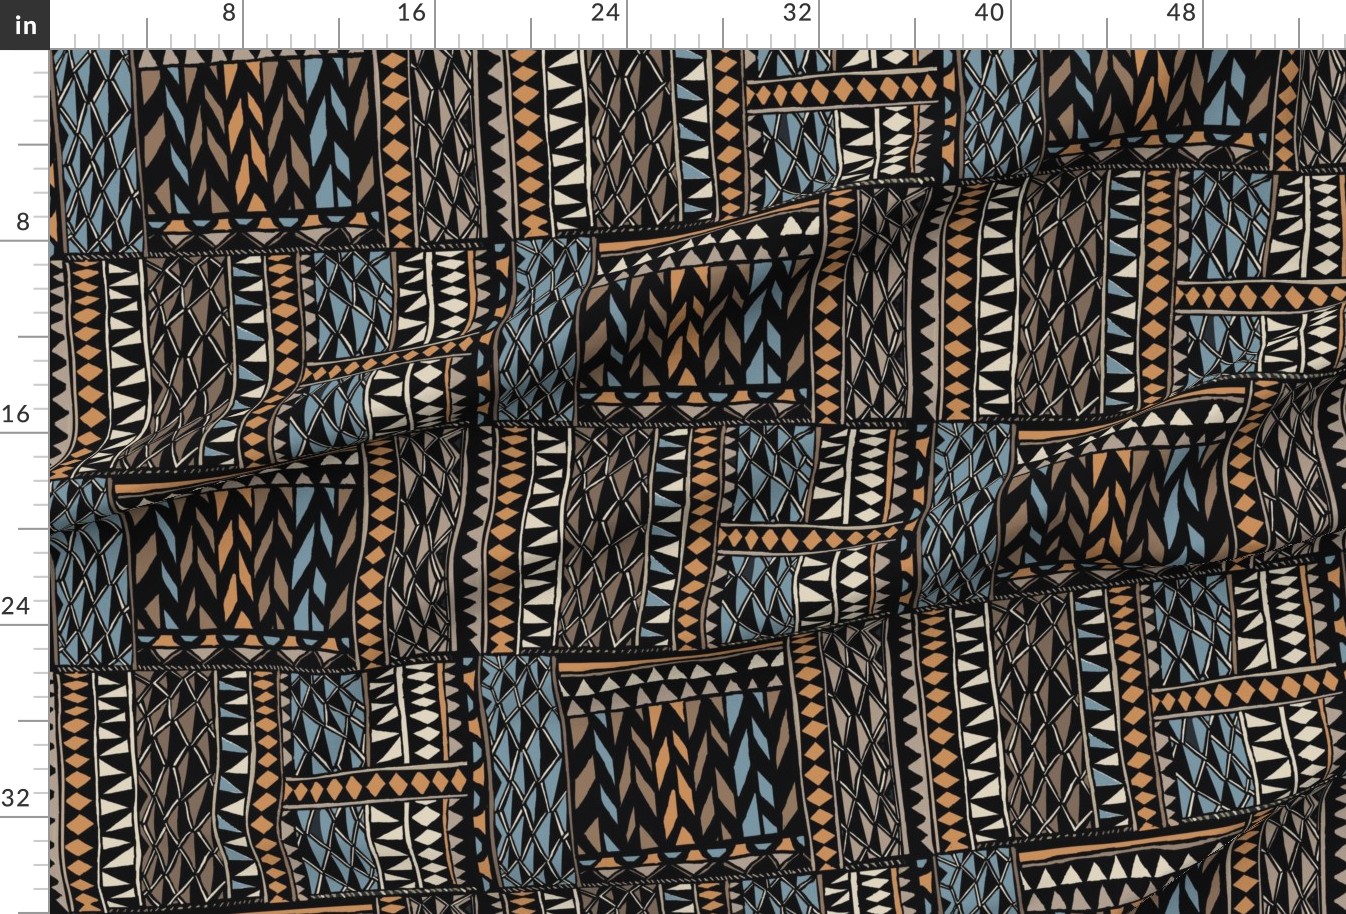 Africa Shields Tribal Challenge Blue Red Maasai Spoonflower Fabric by the  Yard